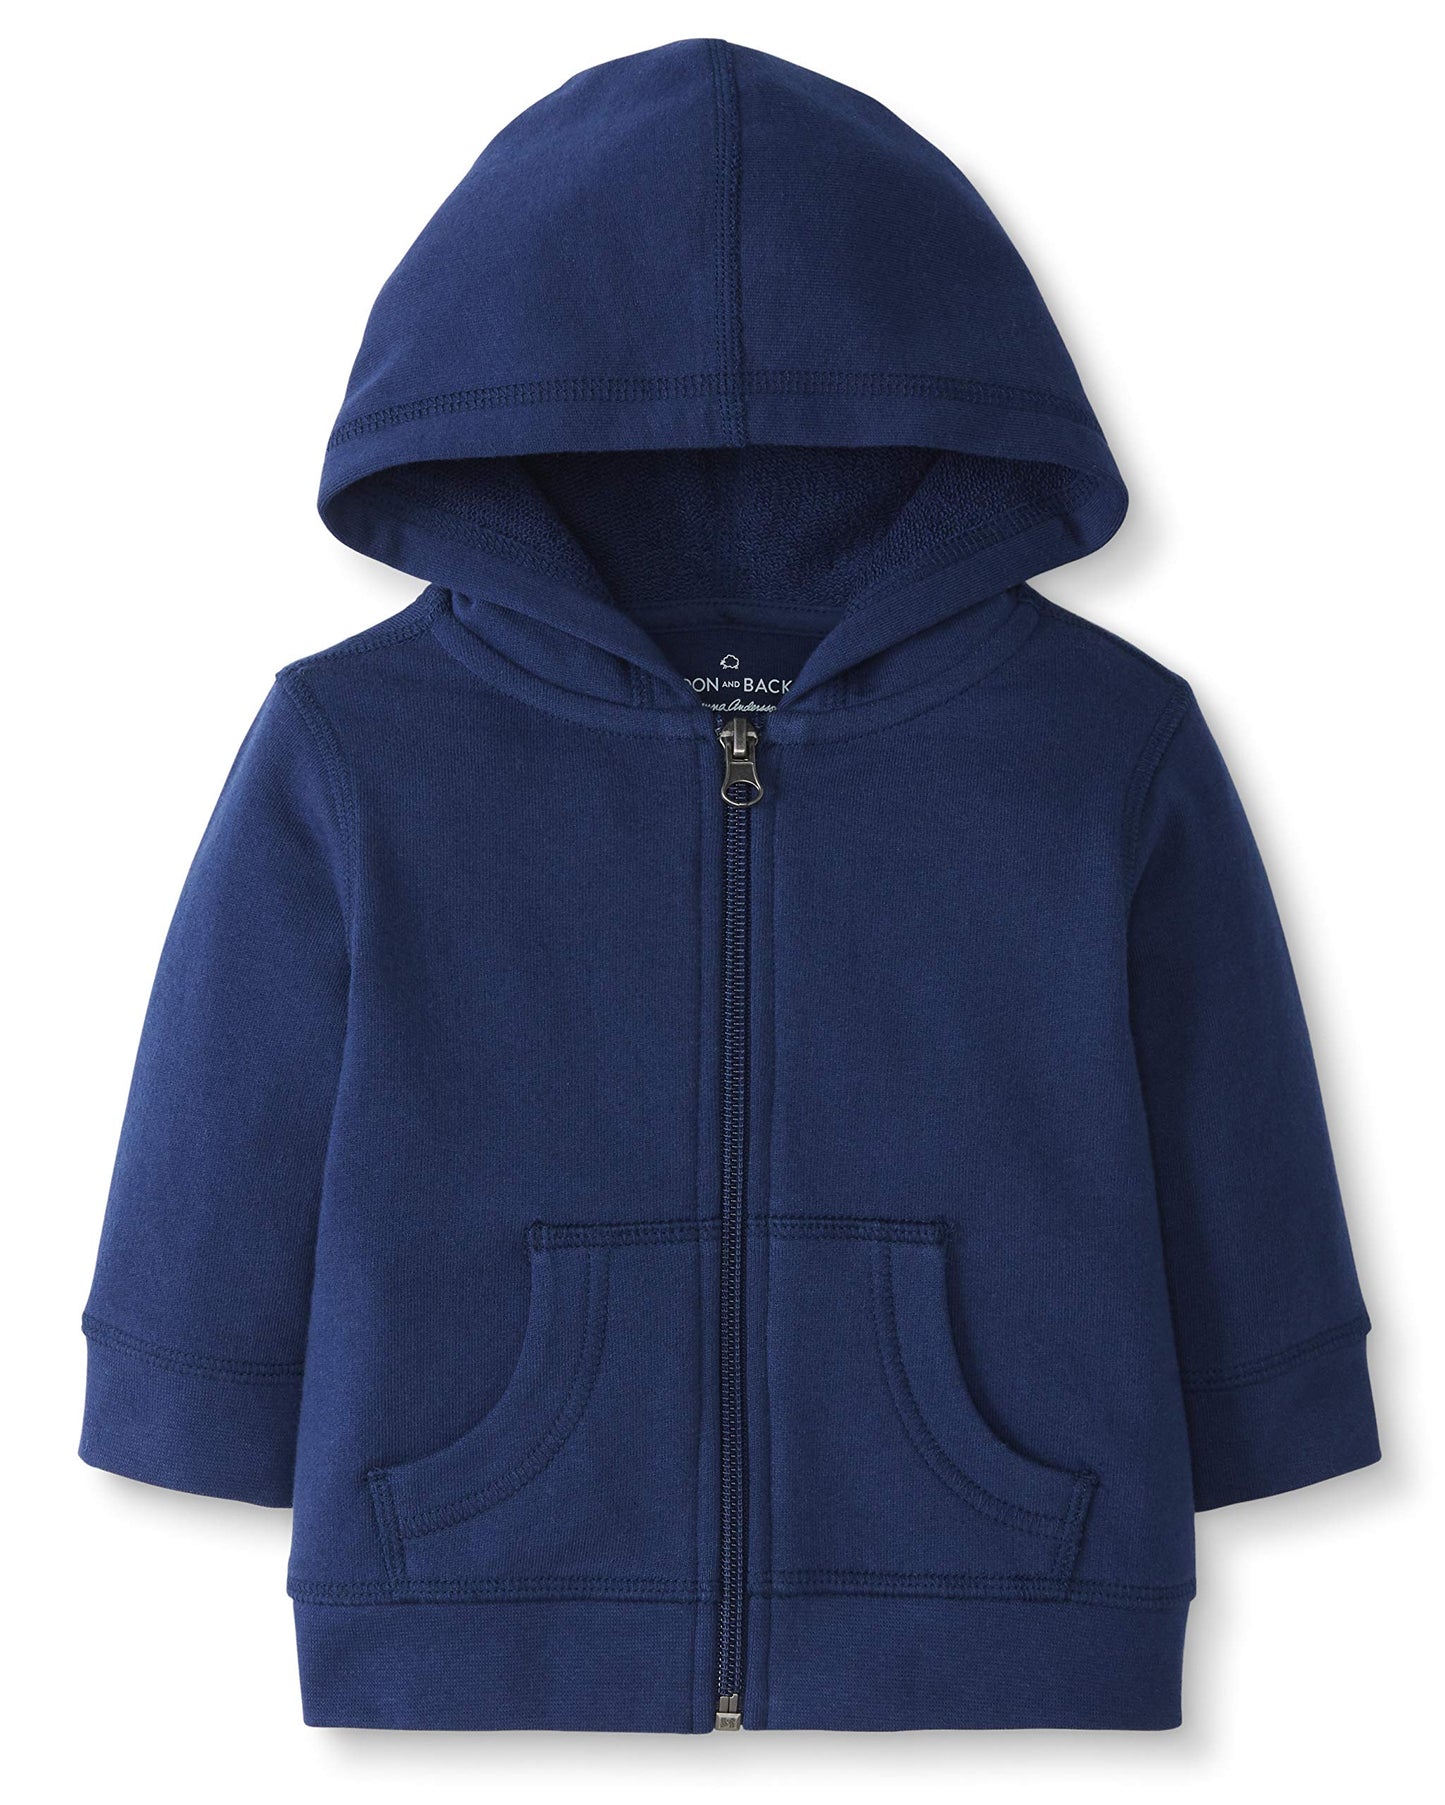 Moon and Back by Hanna Andersson Unisex Babies' Hooded Sweatshirt, Navy, 0-3 Months